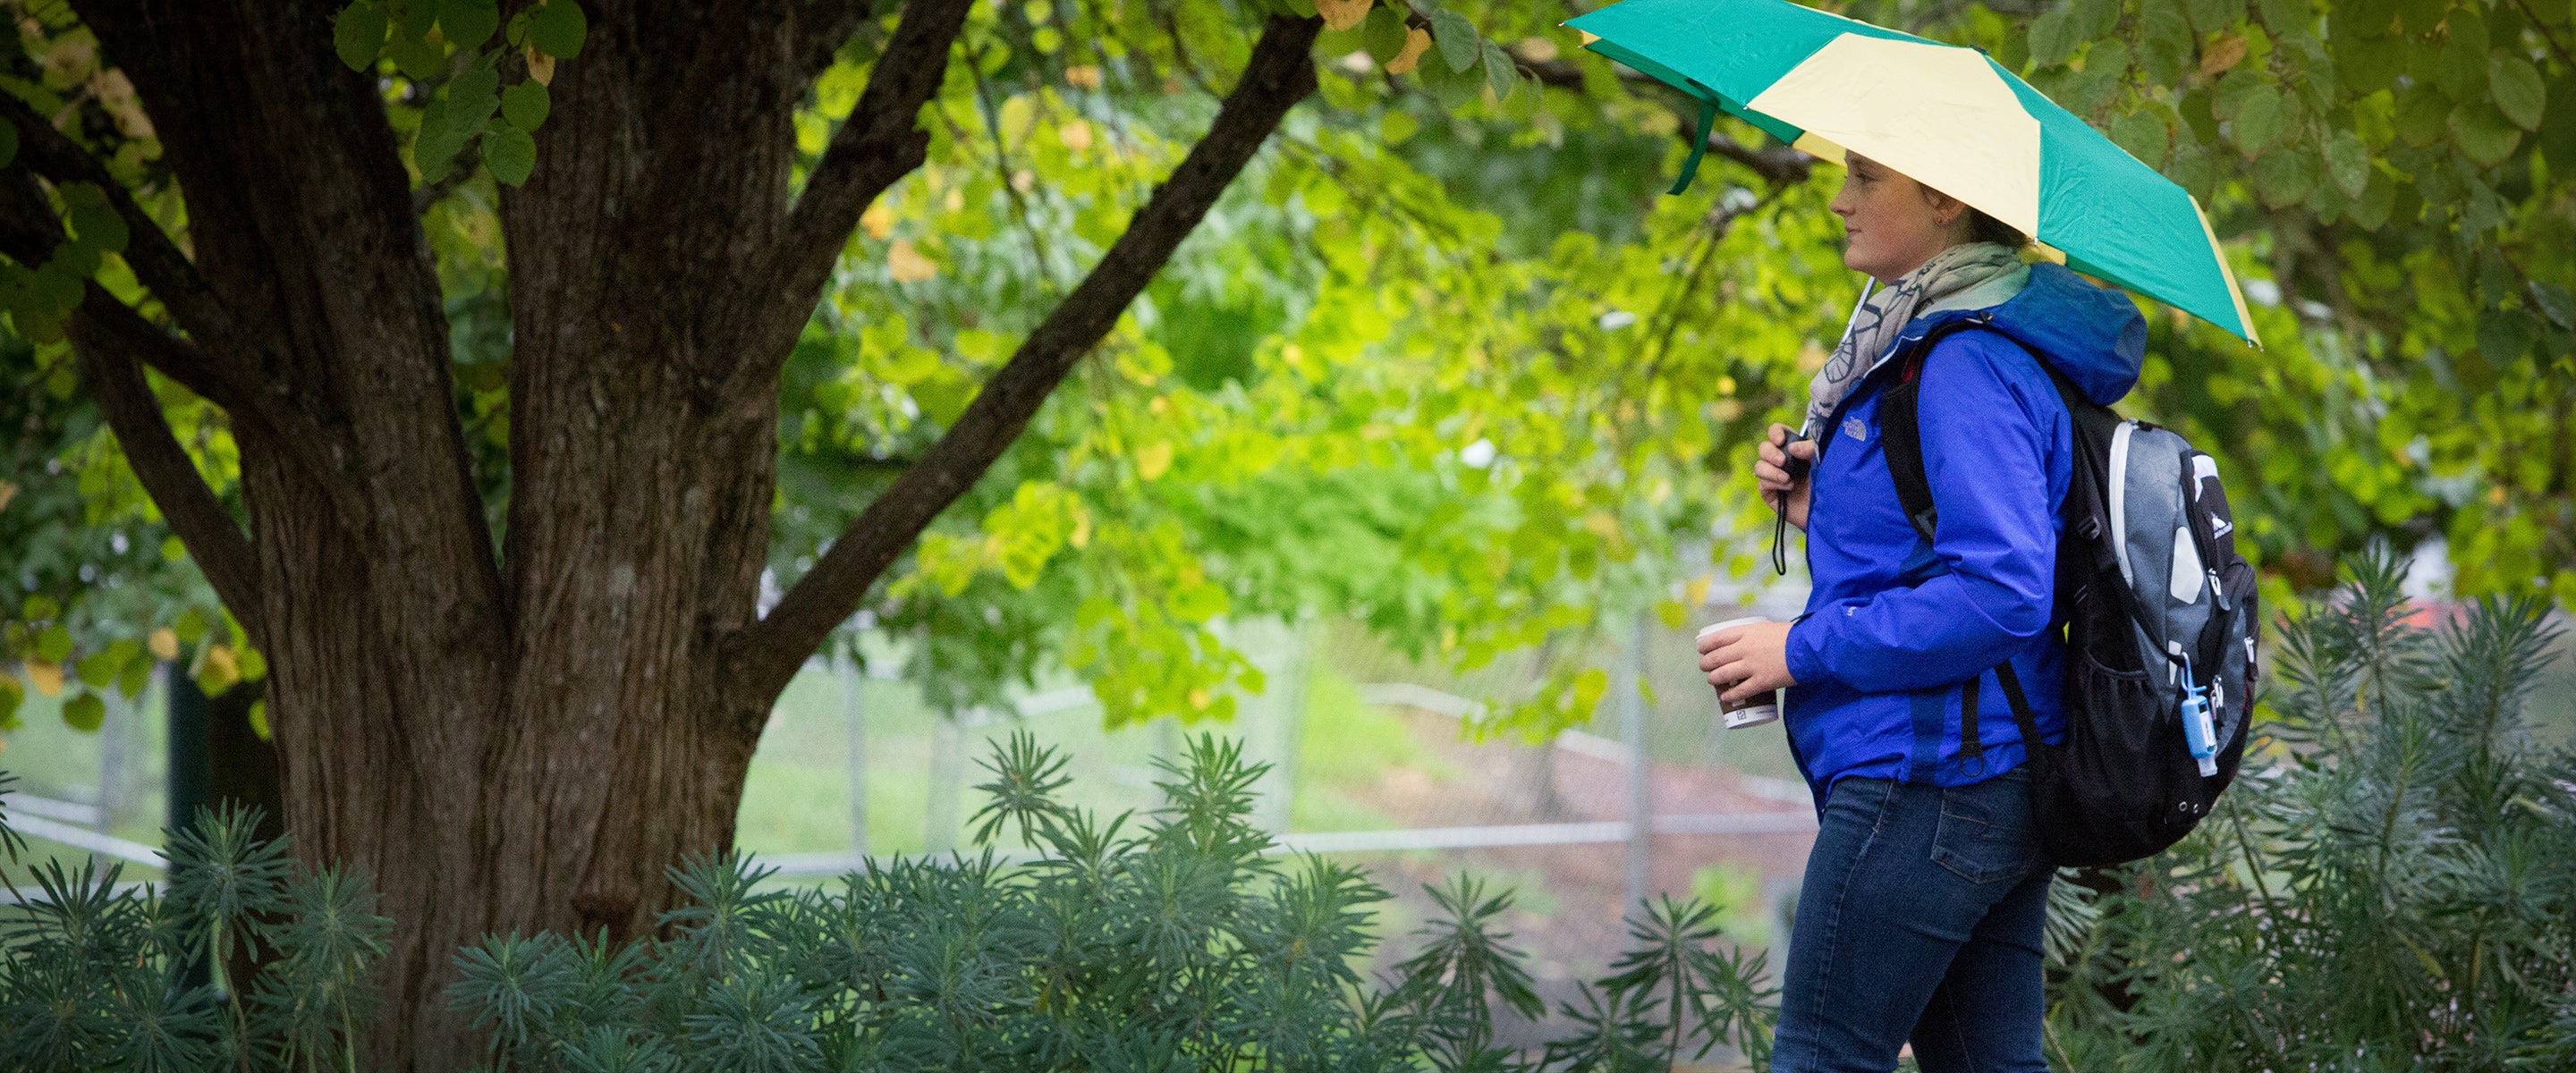 A student in a blue jacket, backpack, green and yellow umbrella, walking on a pathway past some trees